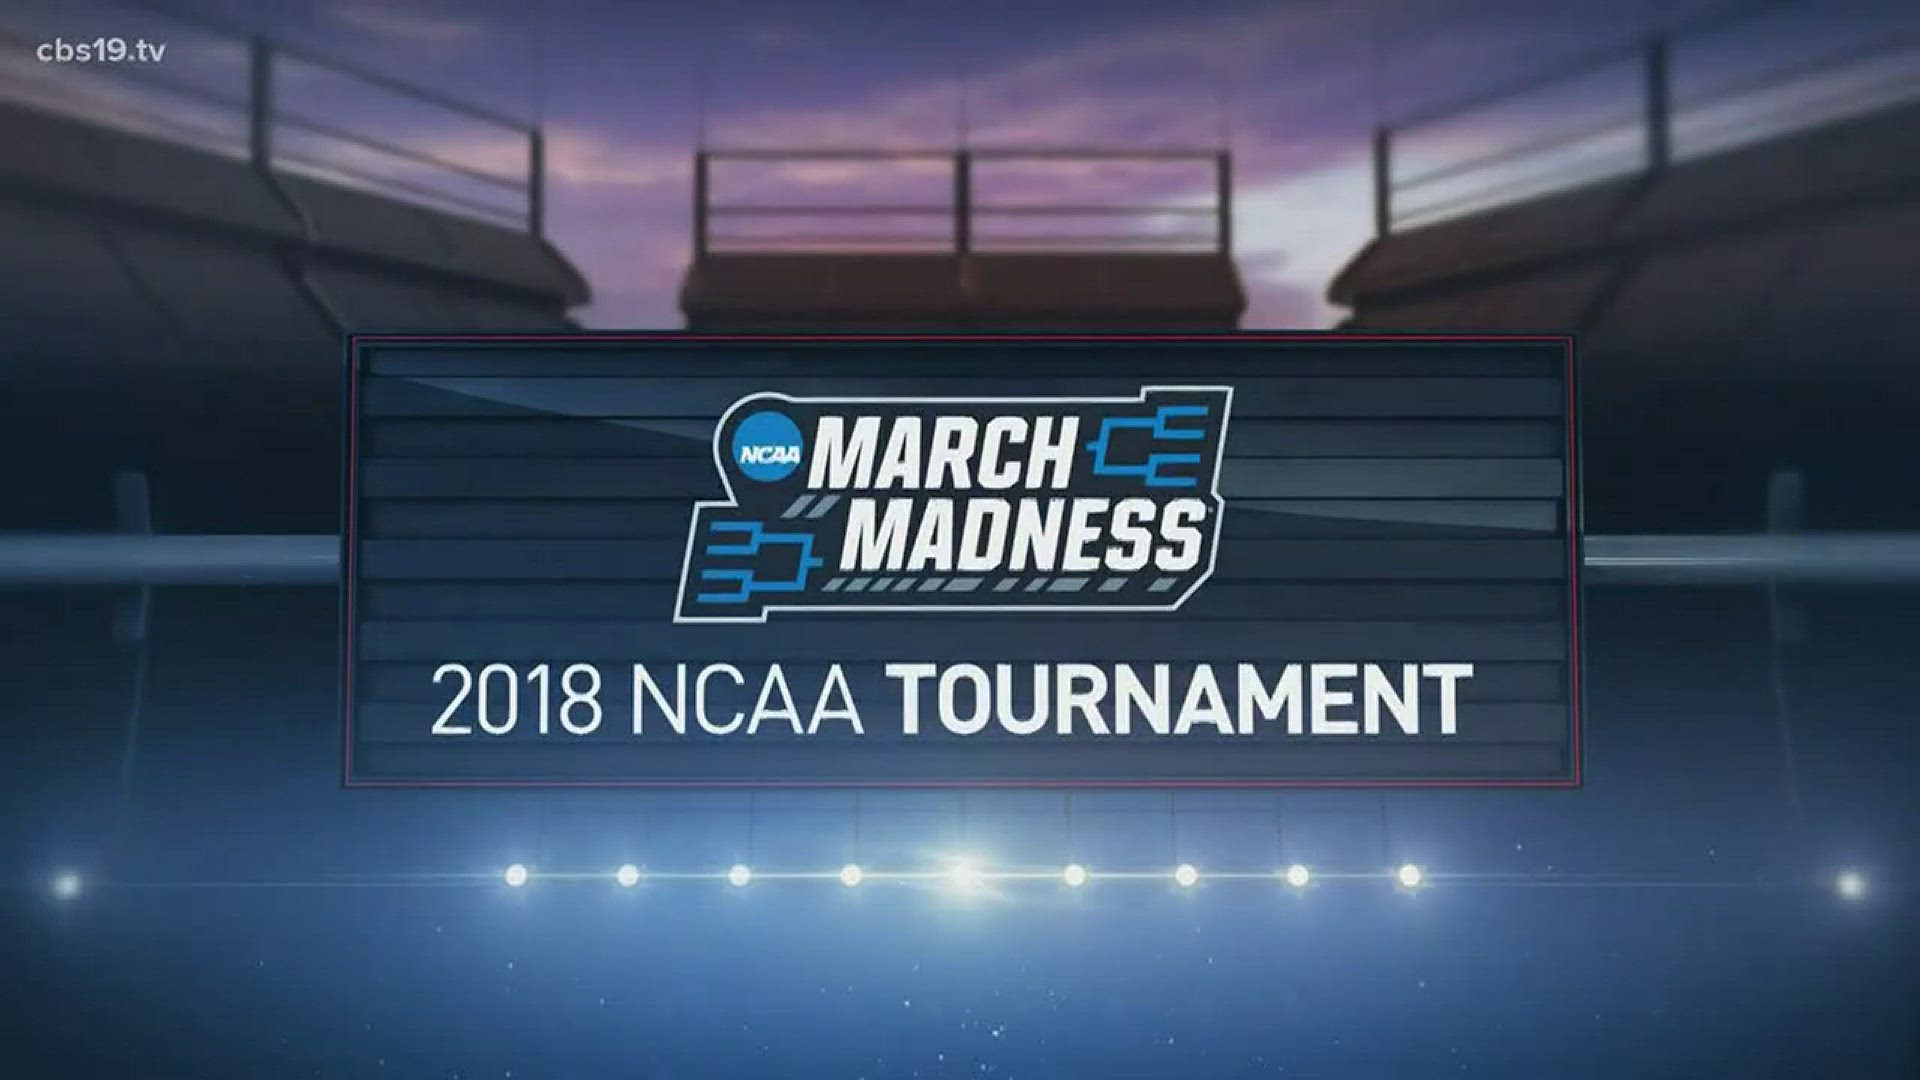 March Madness: A heart divided